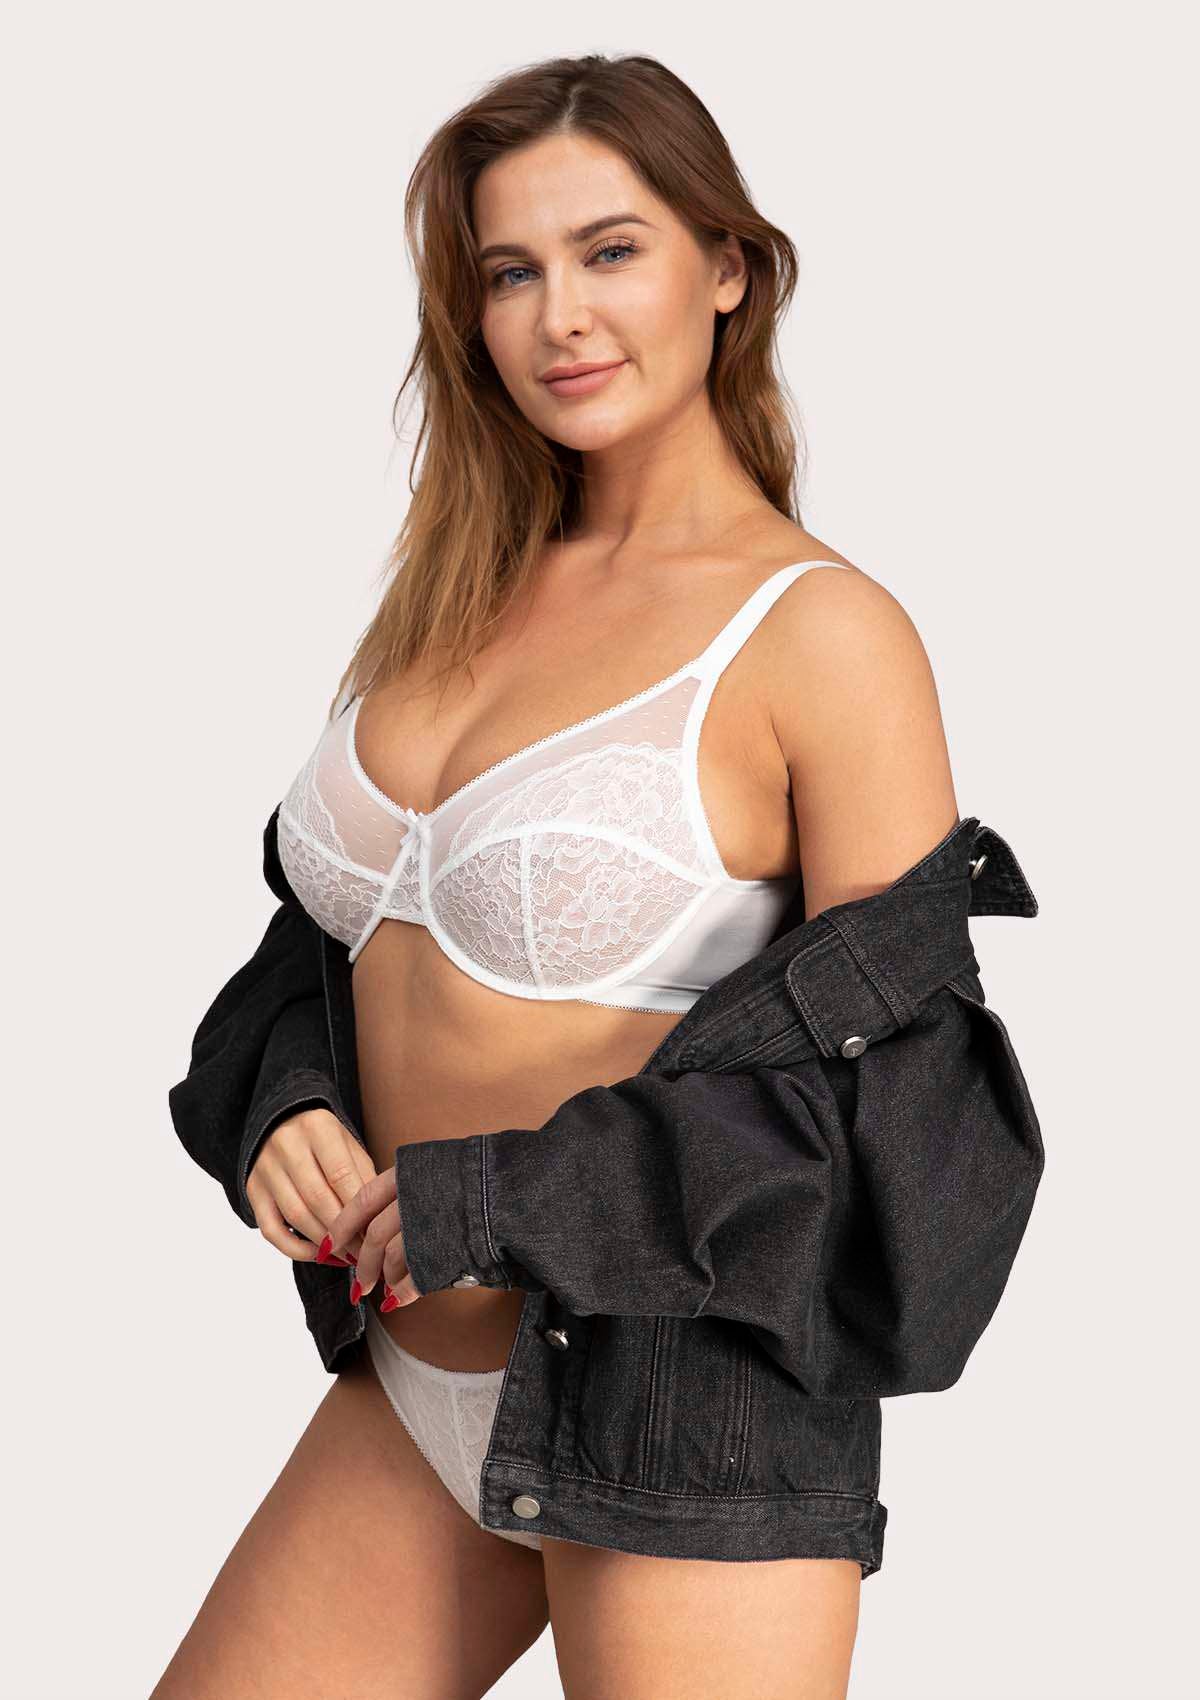 HSIA Enchante Lace Bra And Panties Set: Bra For Side And Back Fat - White / 36 / C